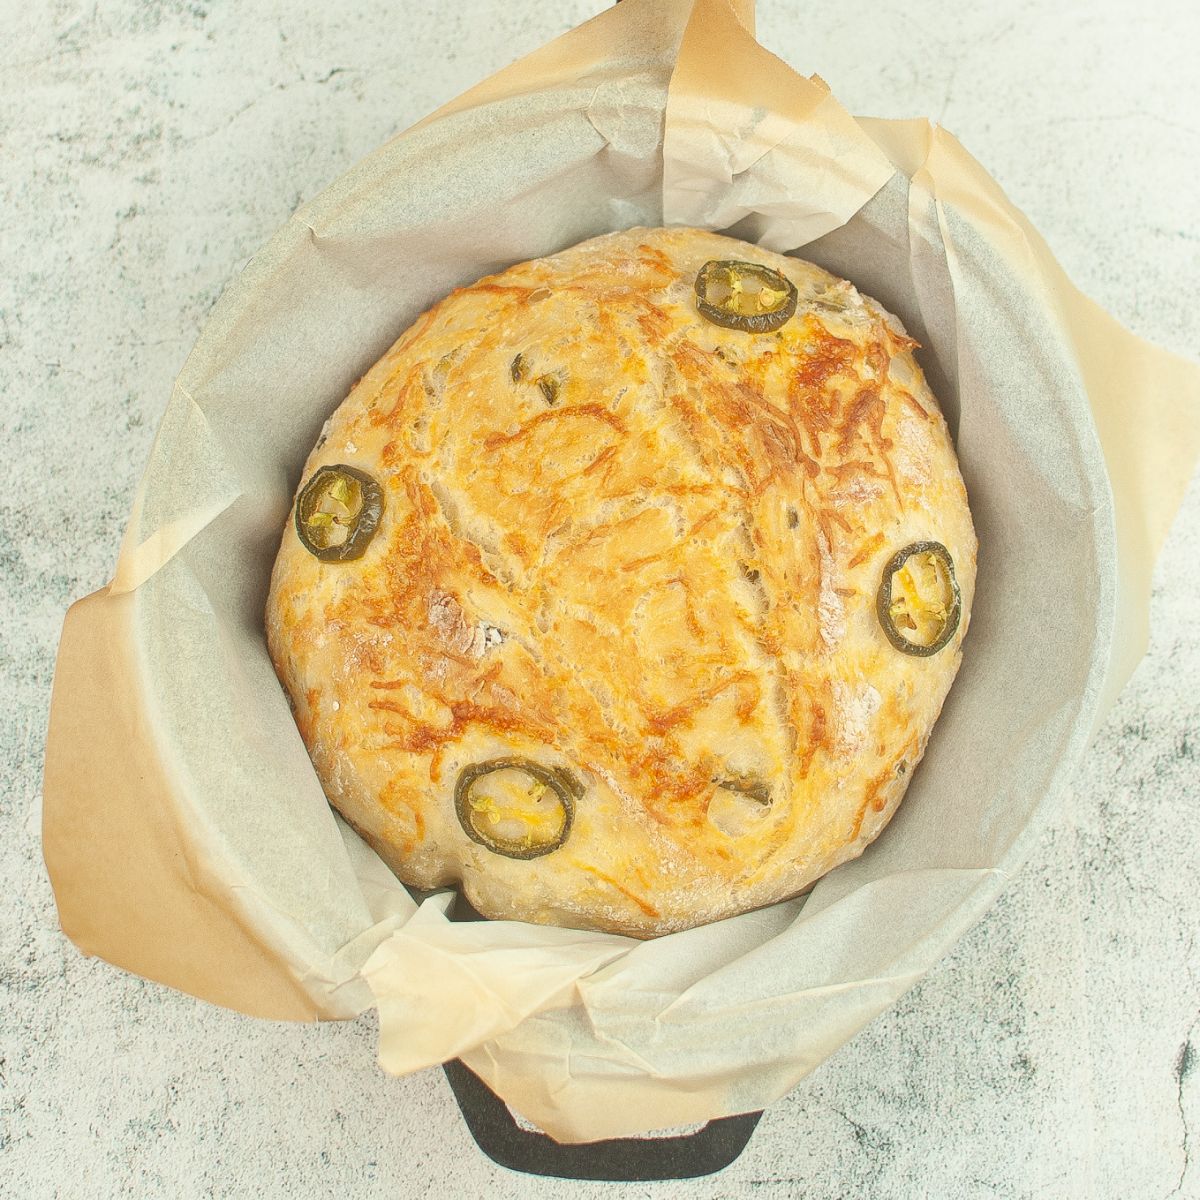 A loaf of bread with jalapenos in it.